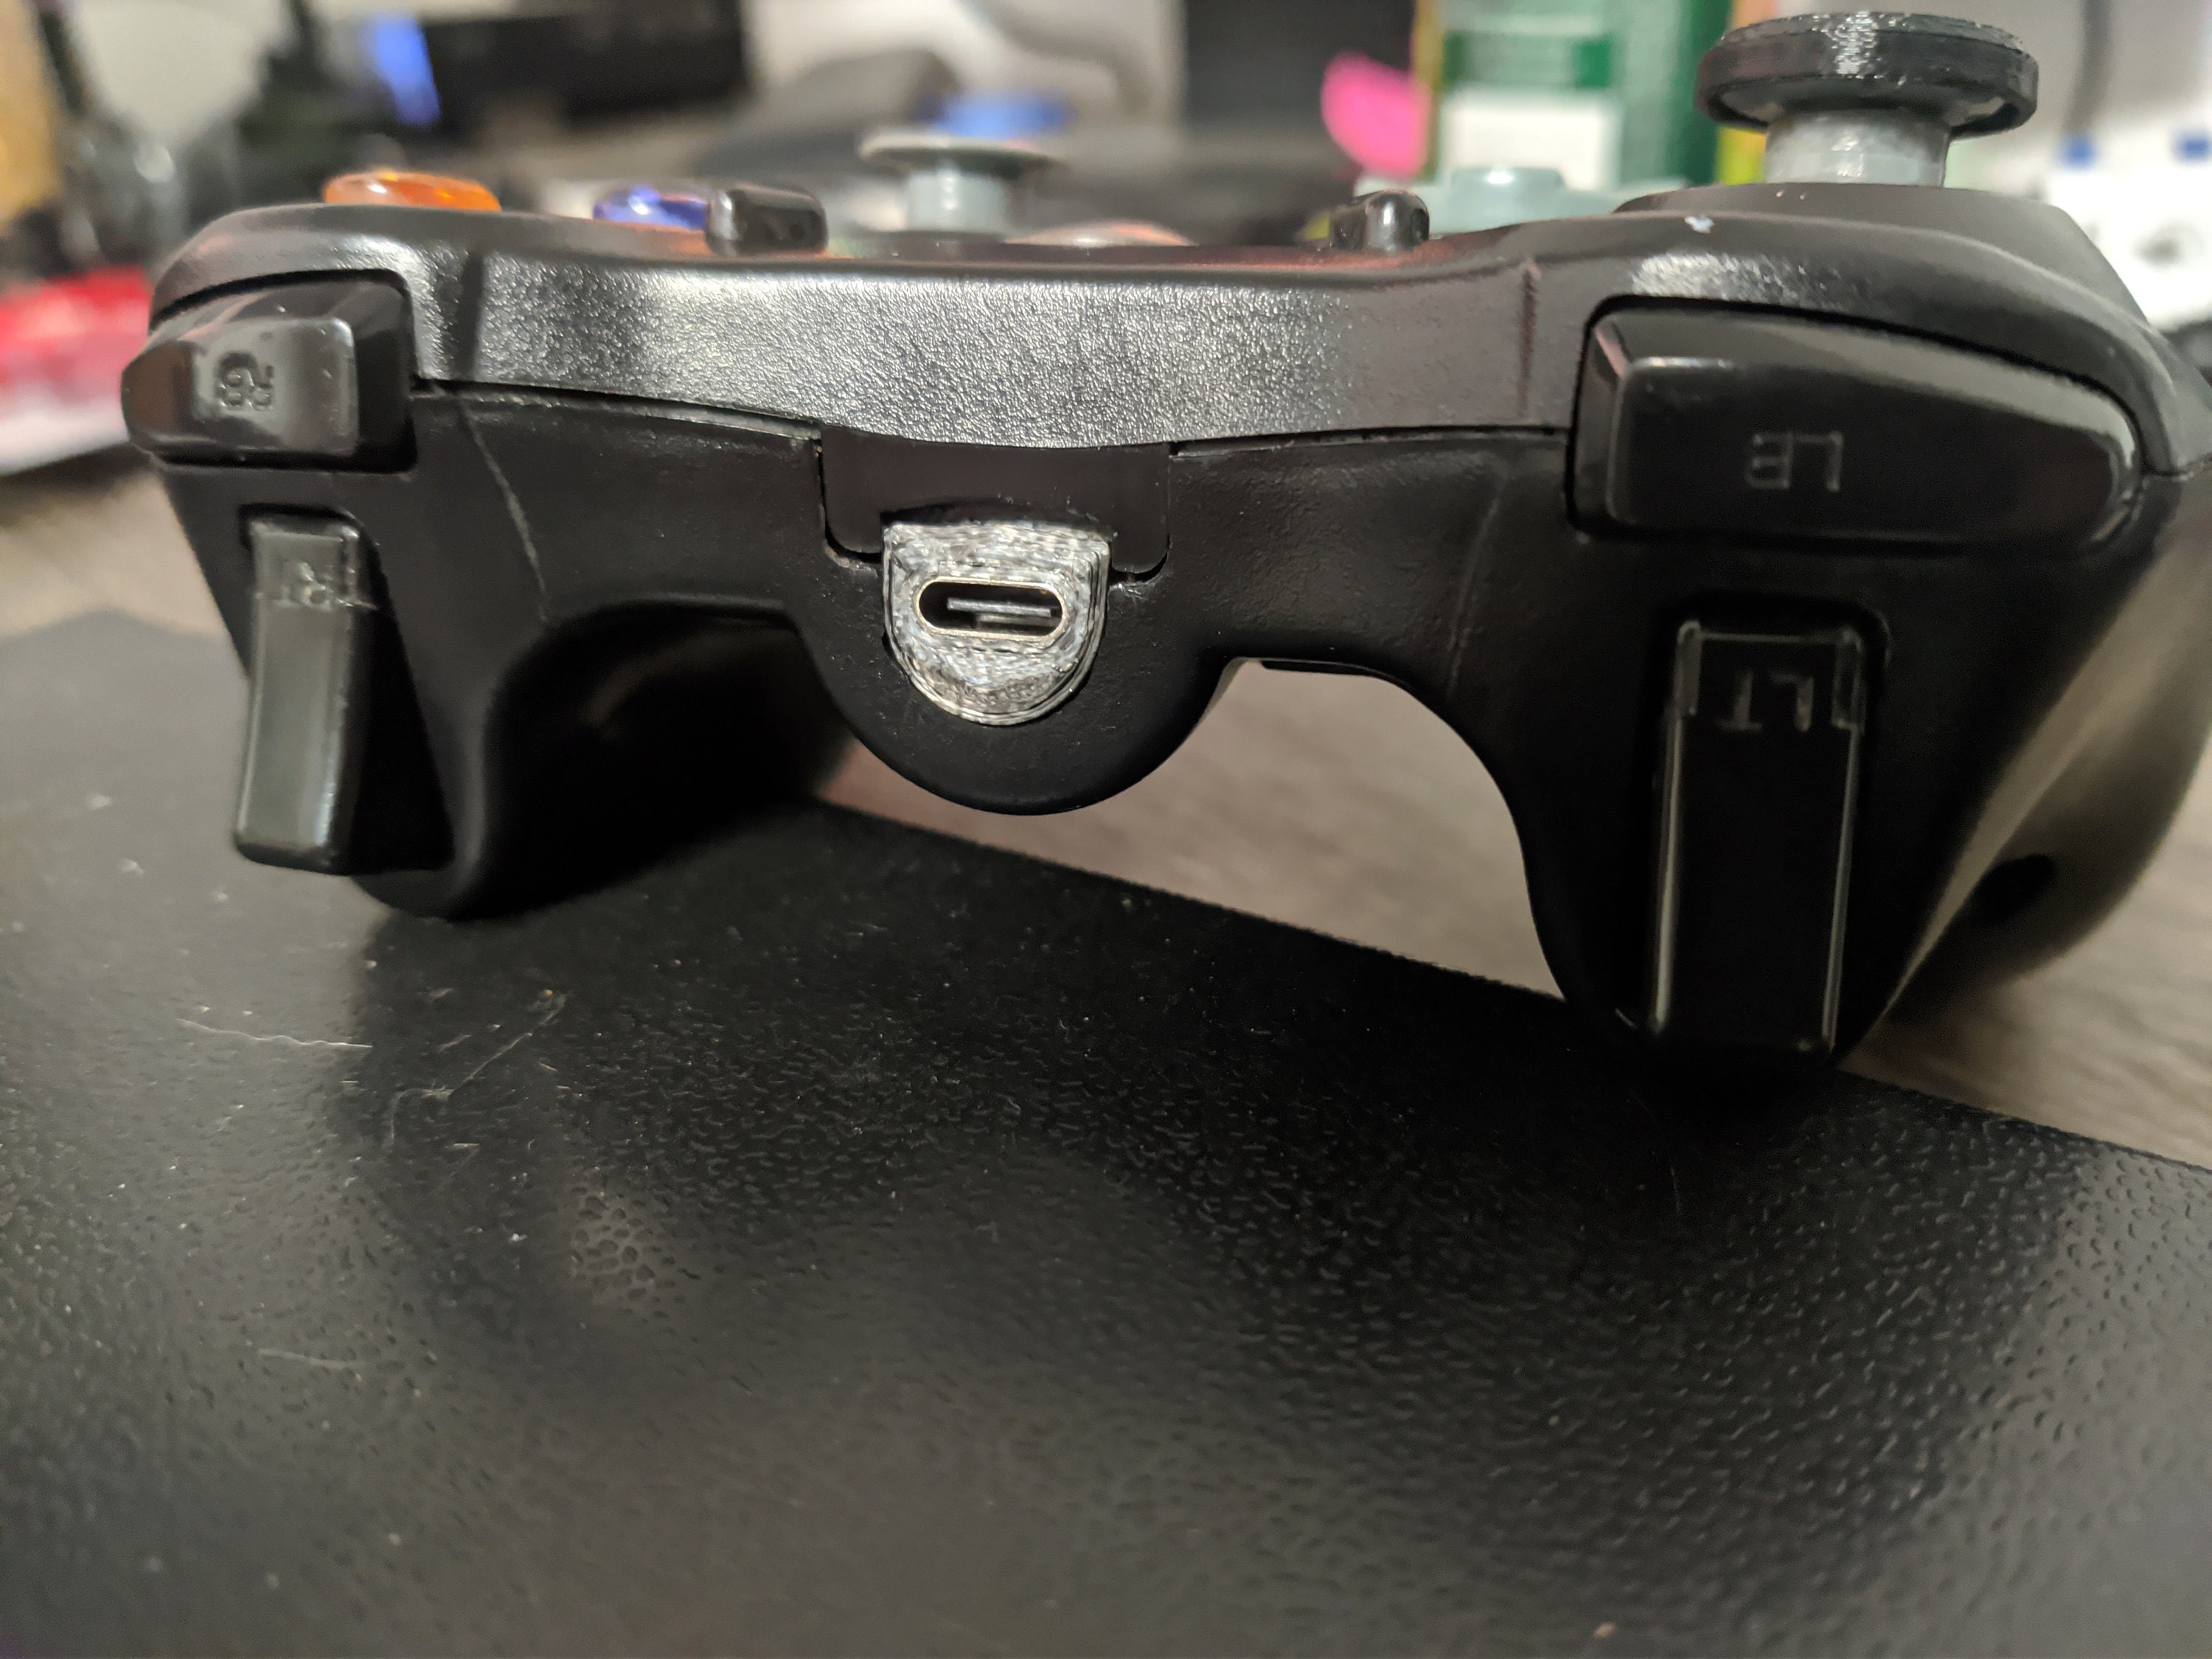 Modded an Xbox 360 controller to use a USB-C port. : r